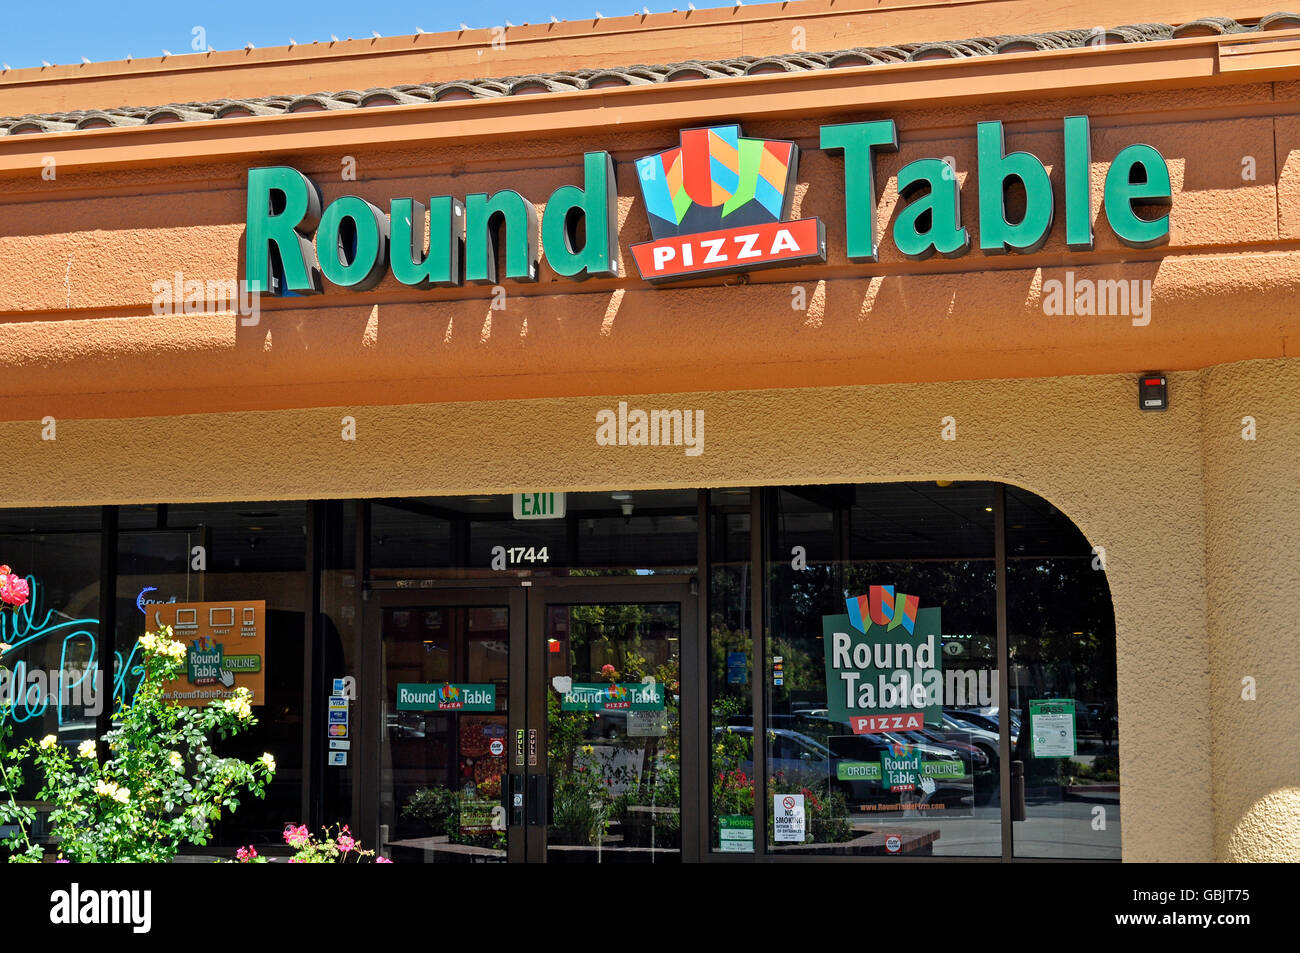 Round Table Pizza Restaurant Store